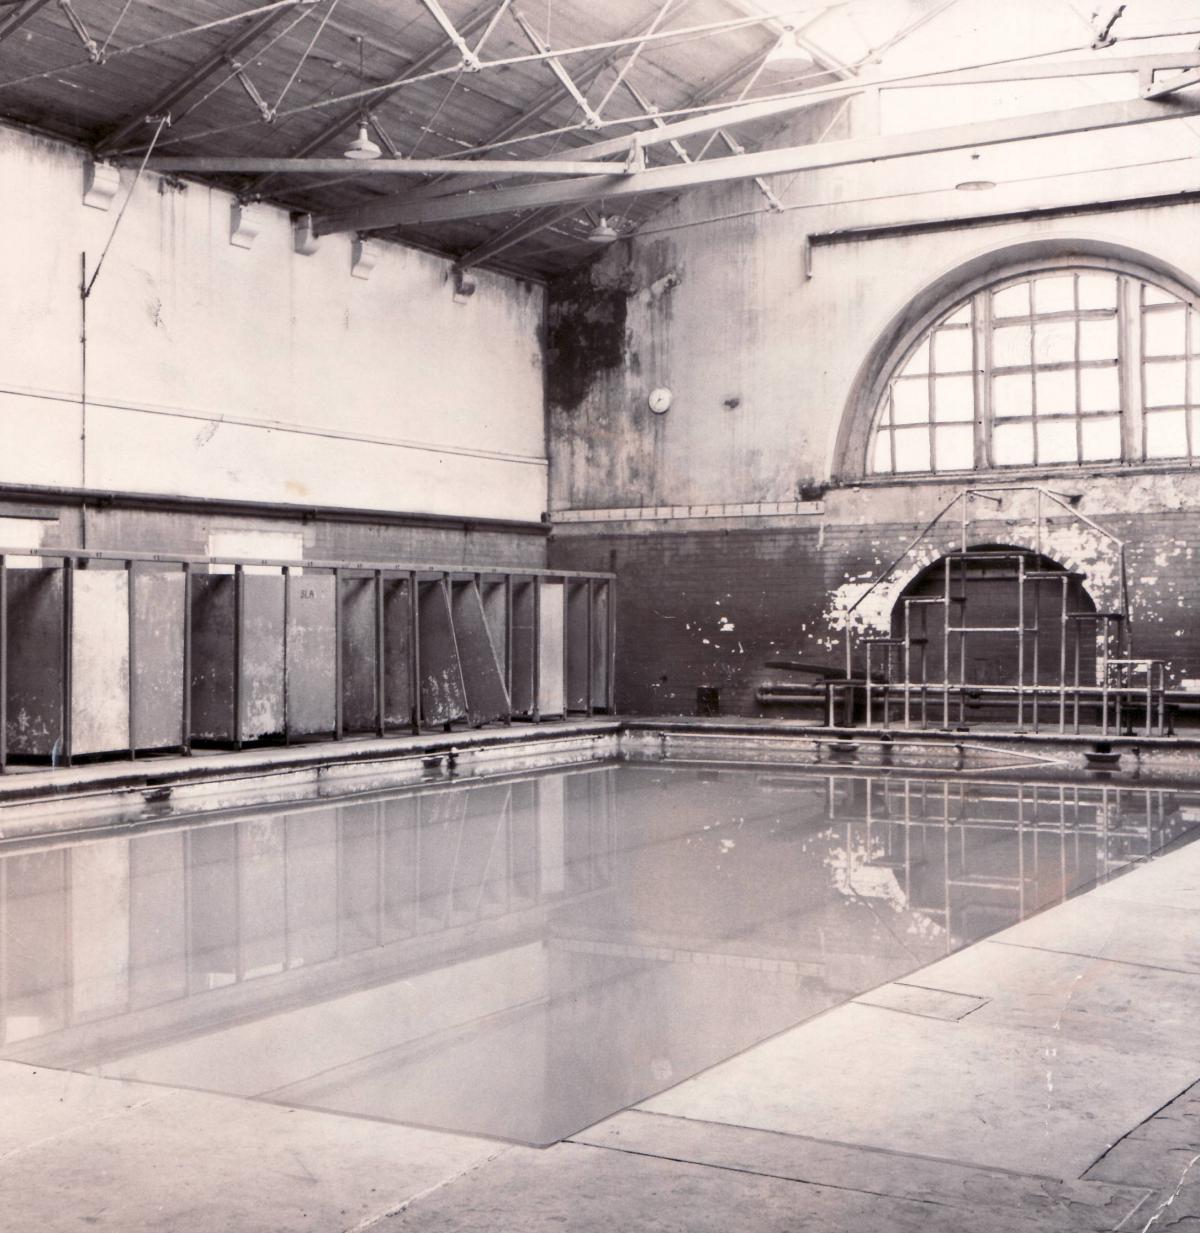 Queensbury Baths in 1969 which was in great need of a refurbishment